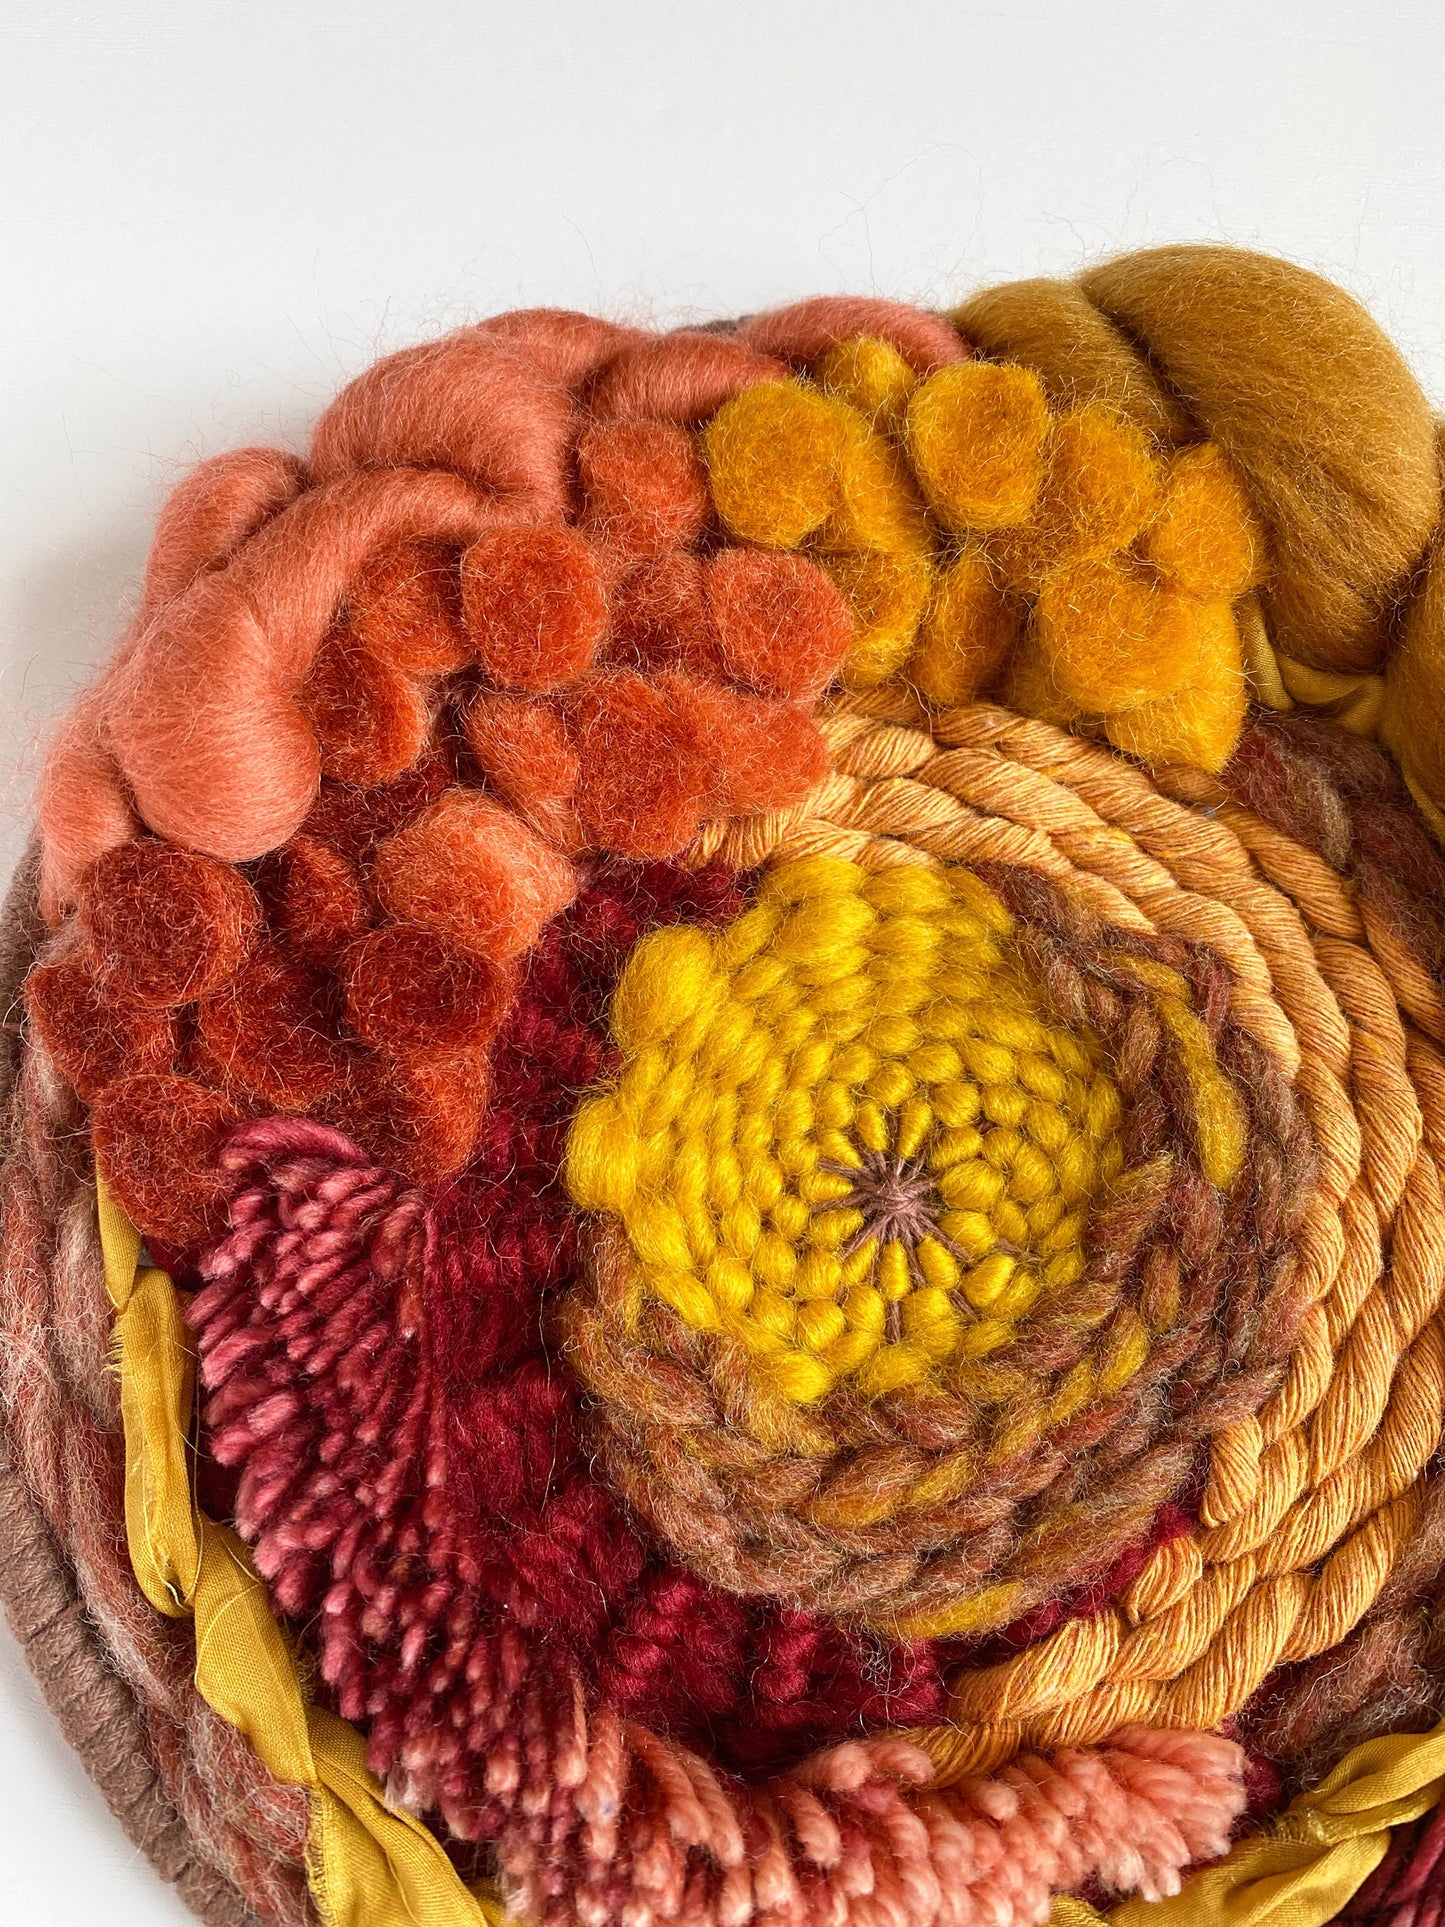 Autumn Afternoon - Woven Wall Hanging